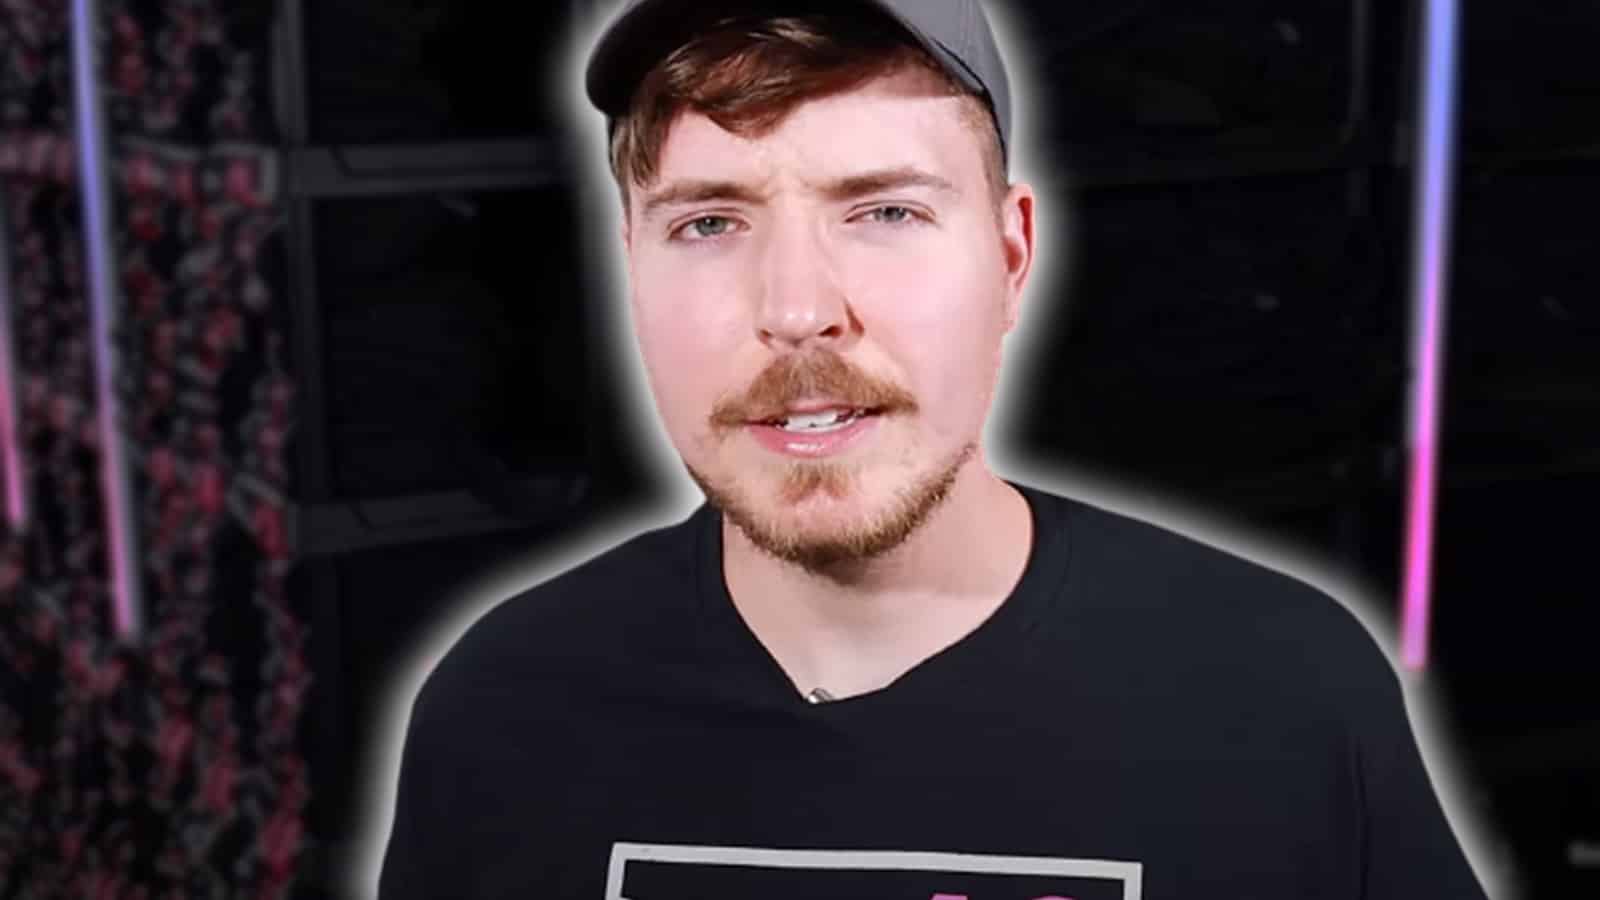 MrBeast accused of bullying by former editors